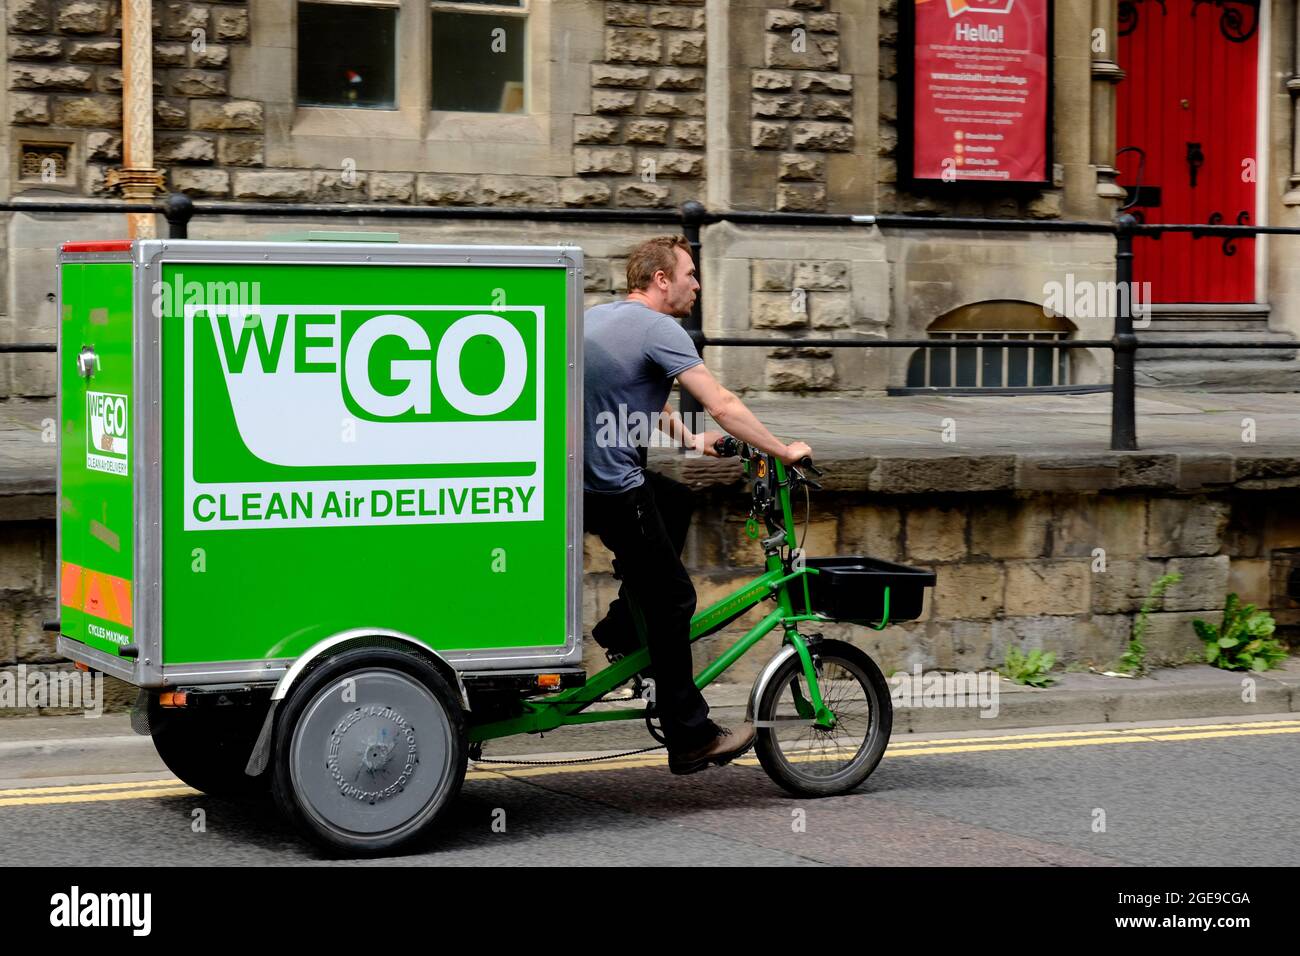 A bicycle deleivery service in Bath somerset UK. We go clean air delivery Stock Photo